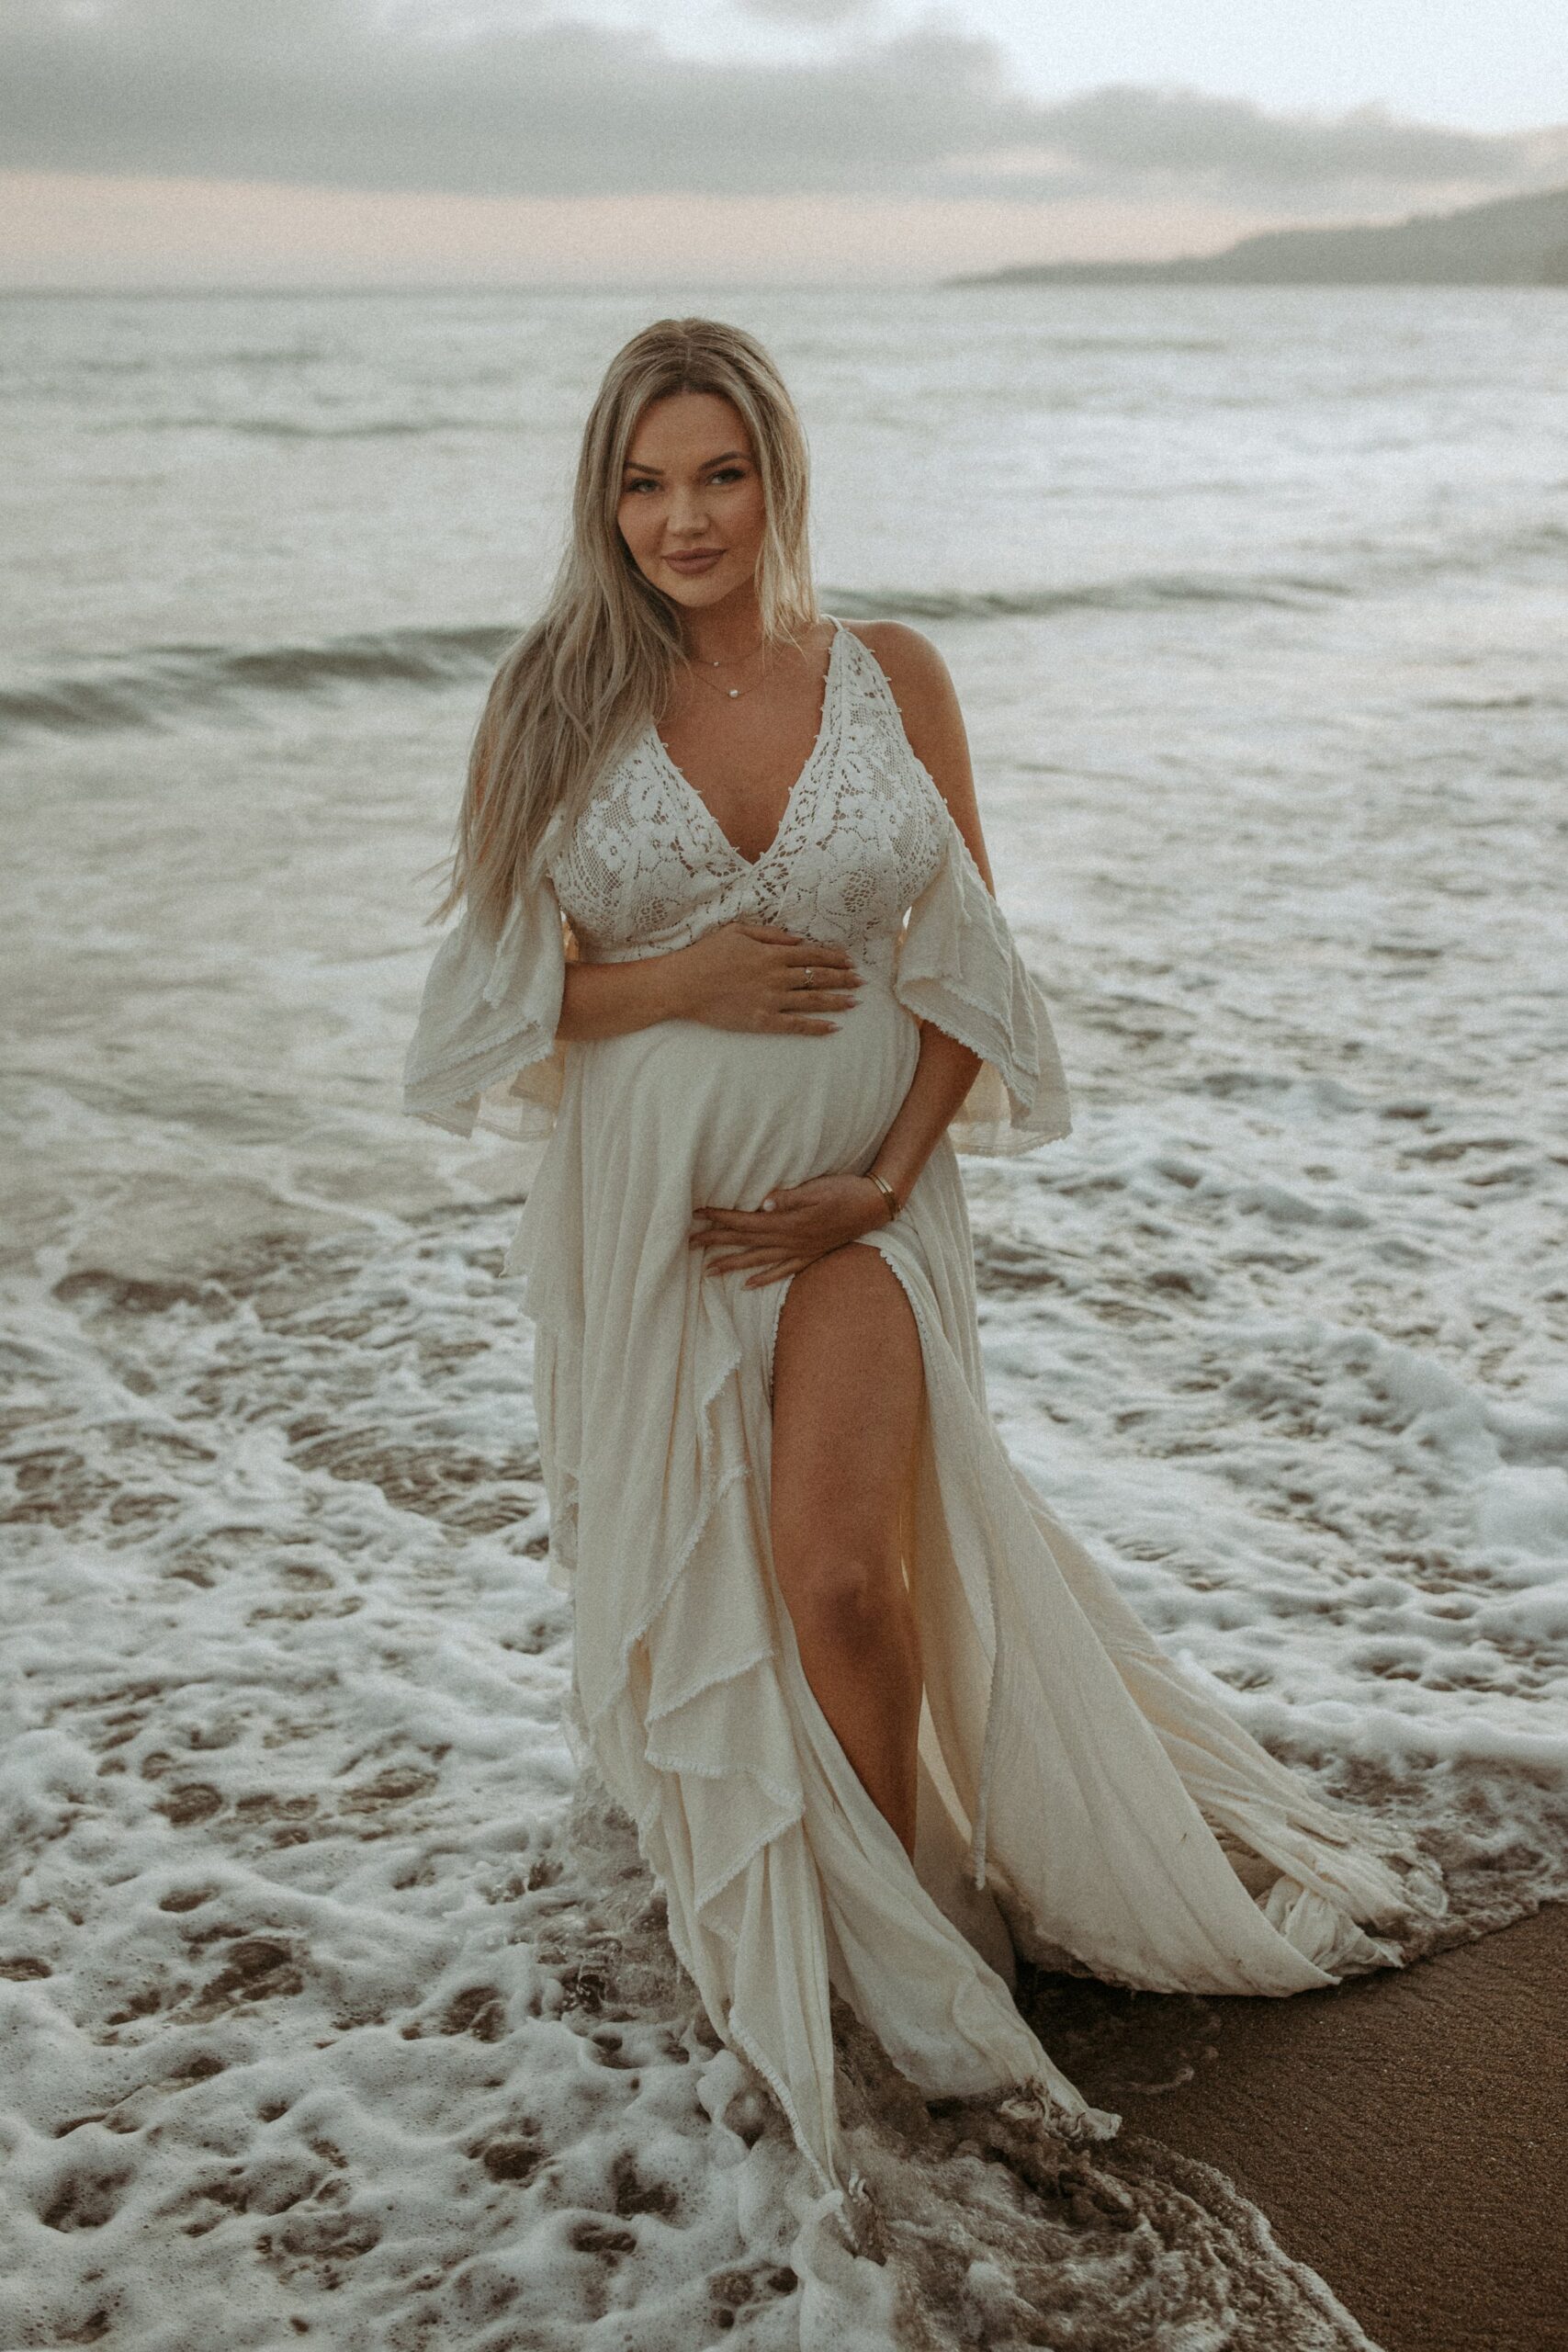 nuture-baby-photography-maternity-beach-session36.jpg